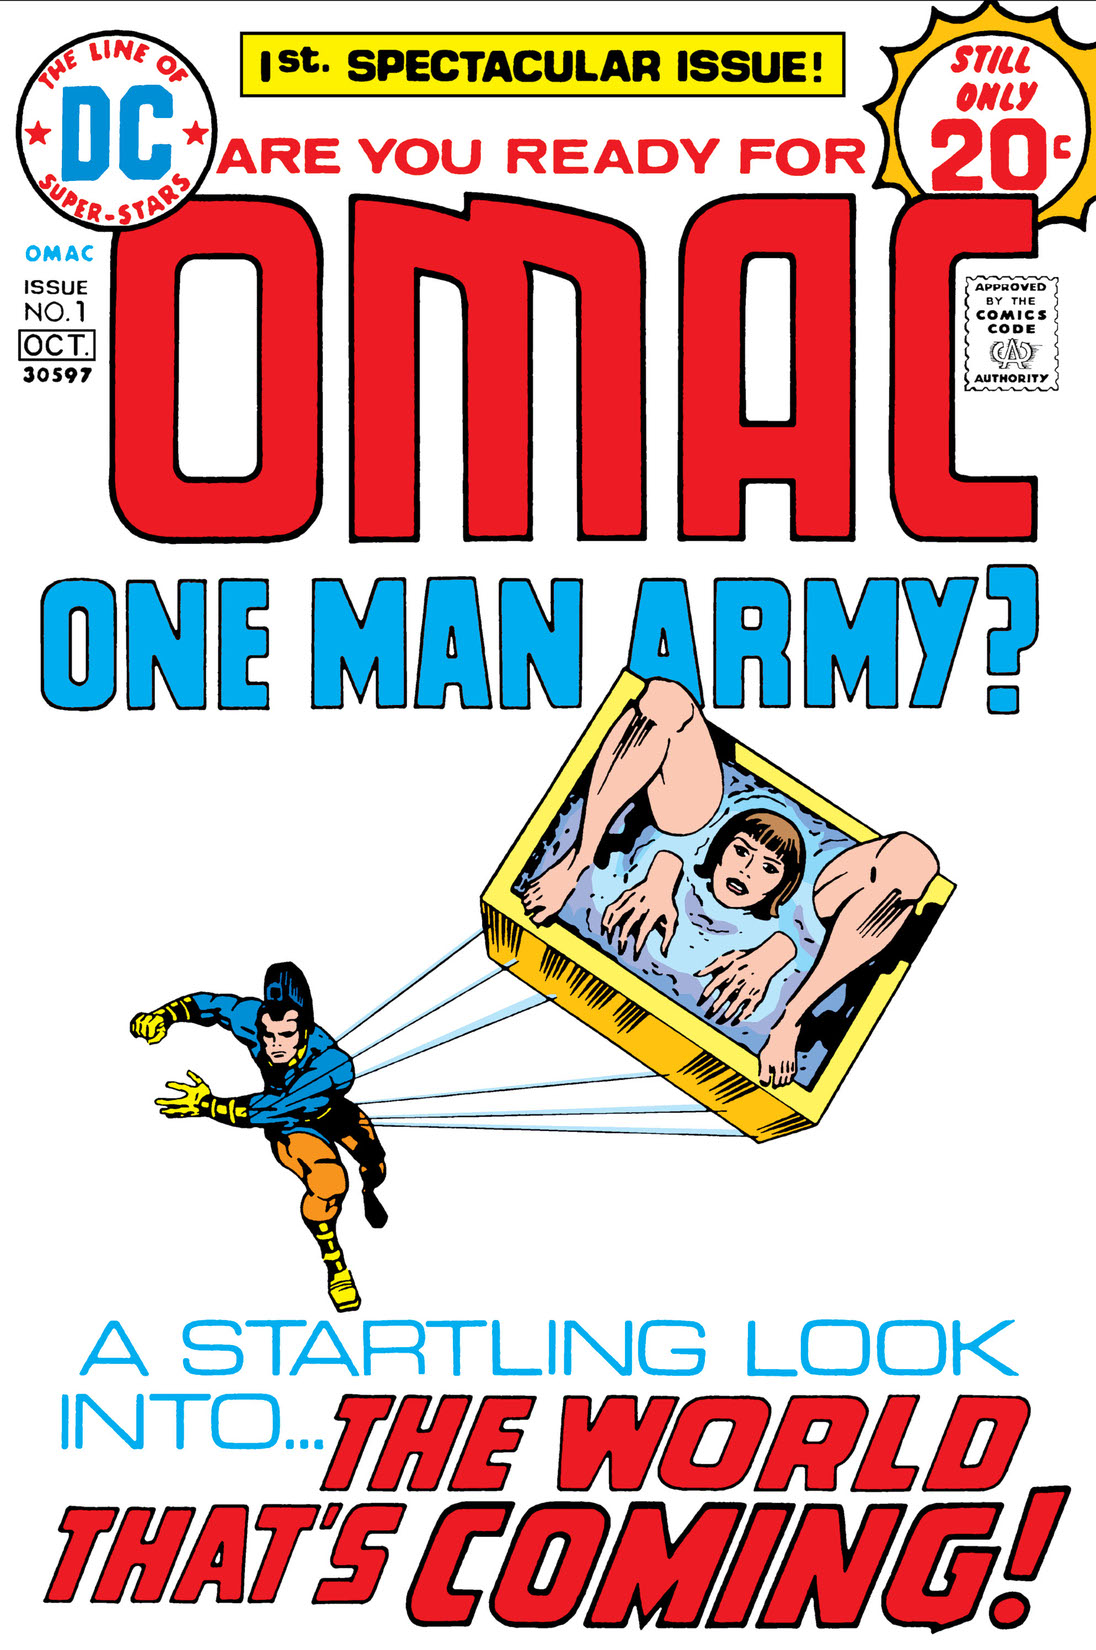 O.M.A.C. (1974-) #1 preview images